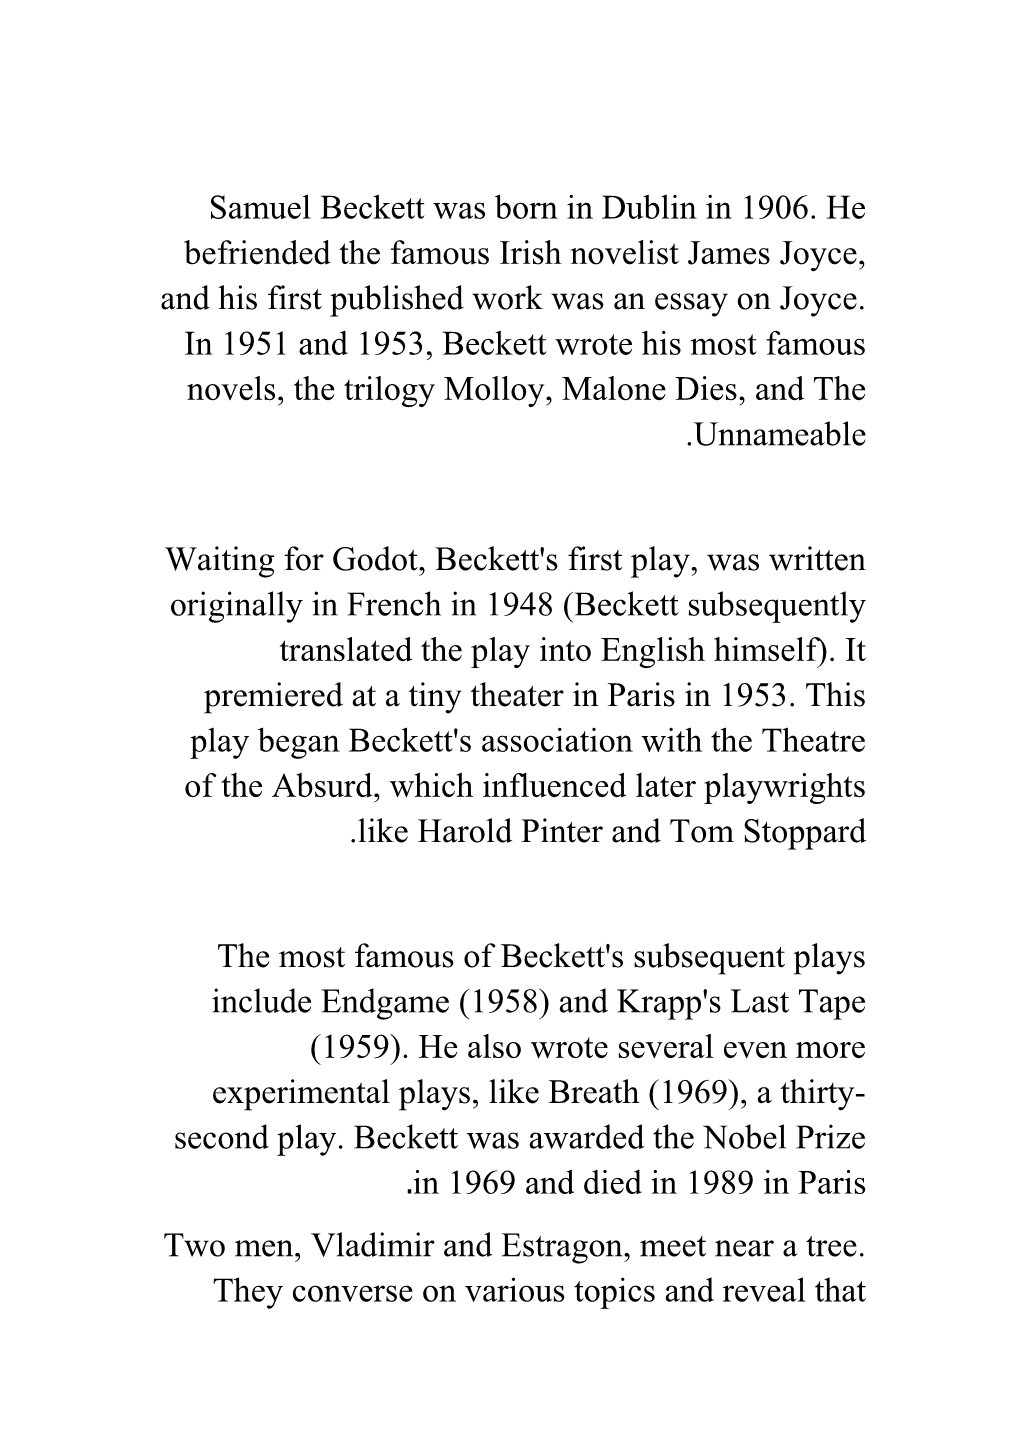 Waiting for Godot, Beckett's First Play, Was Written Originally in French in 1948 (Beckett